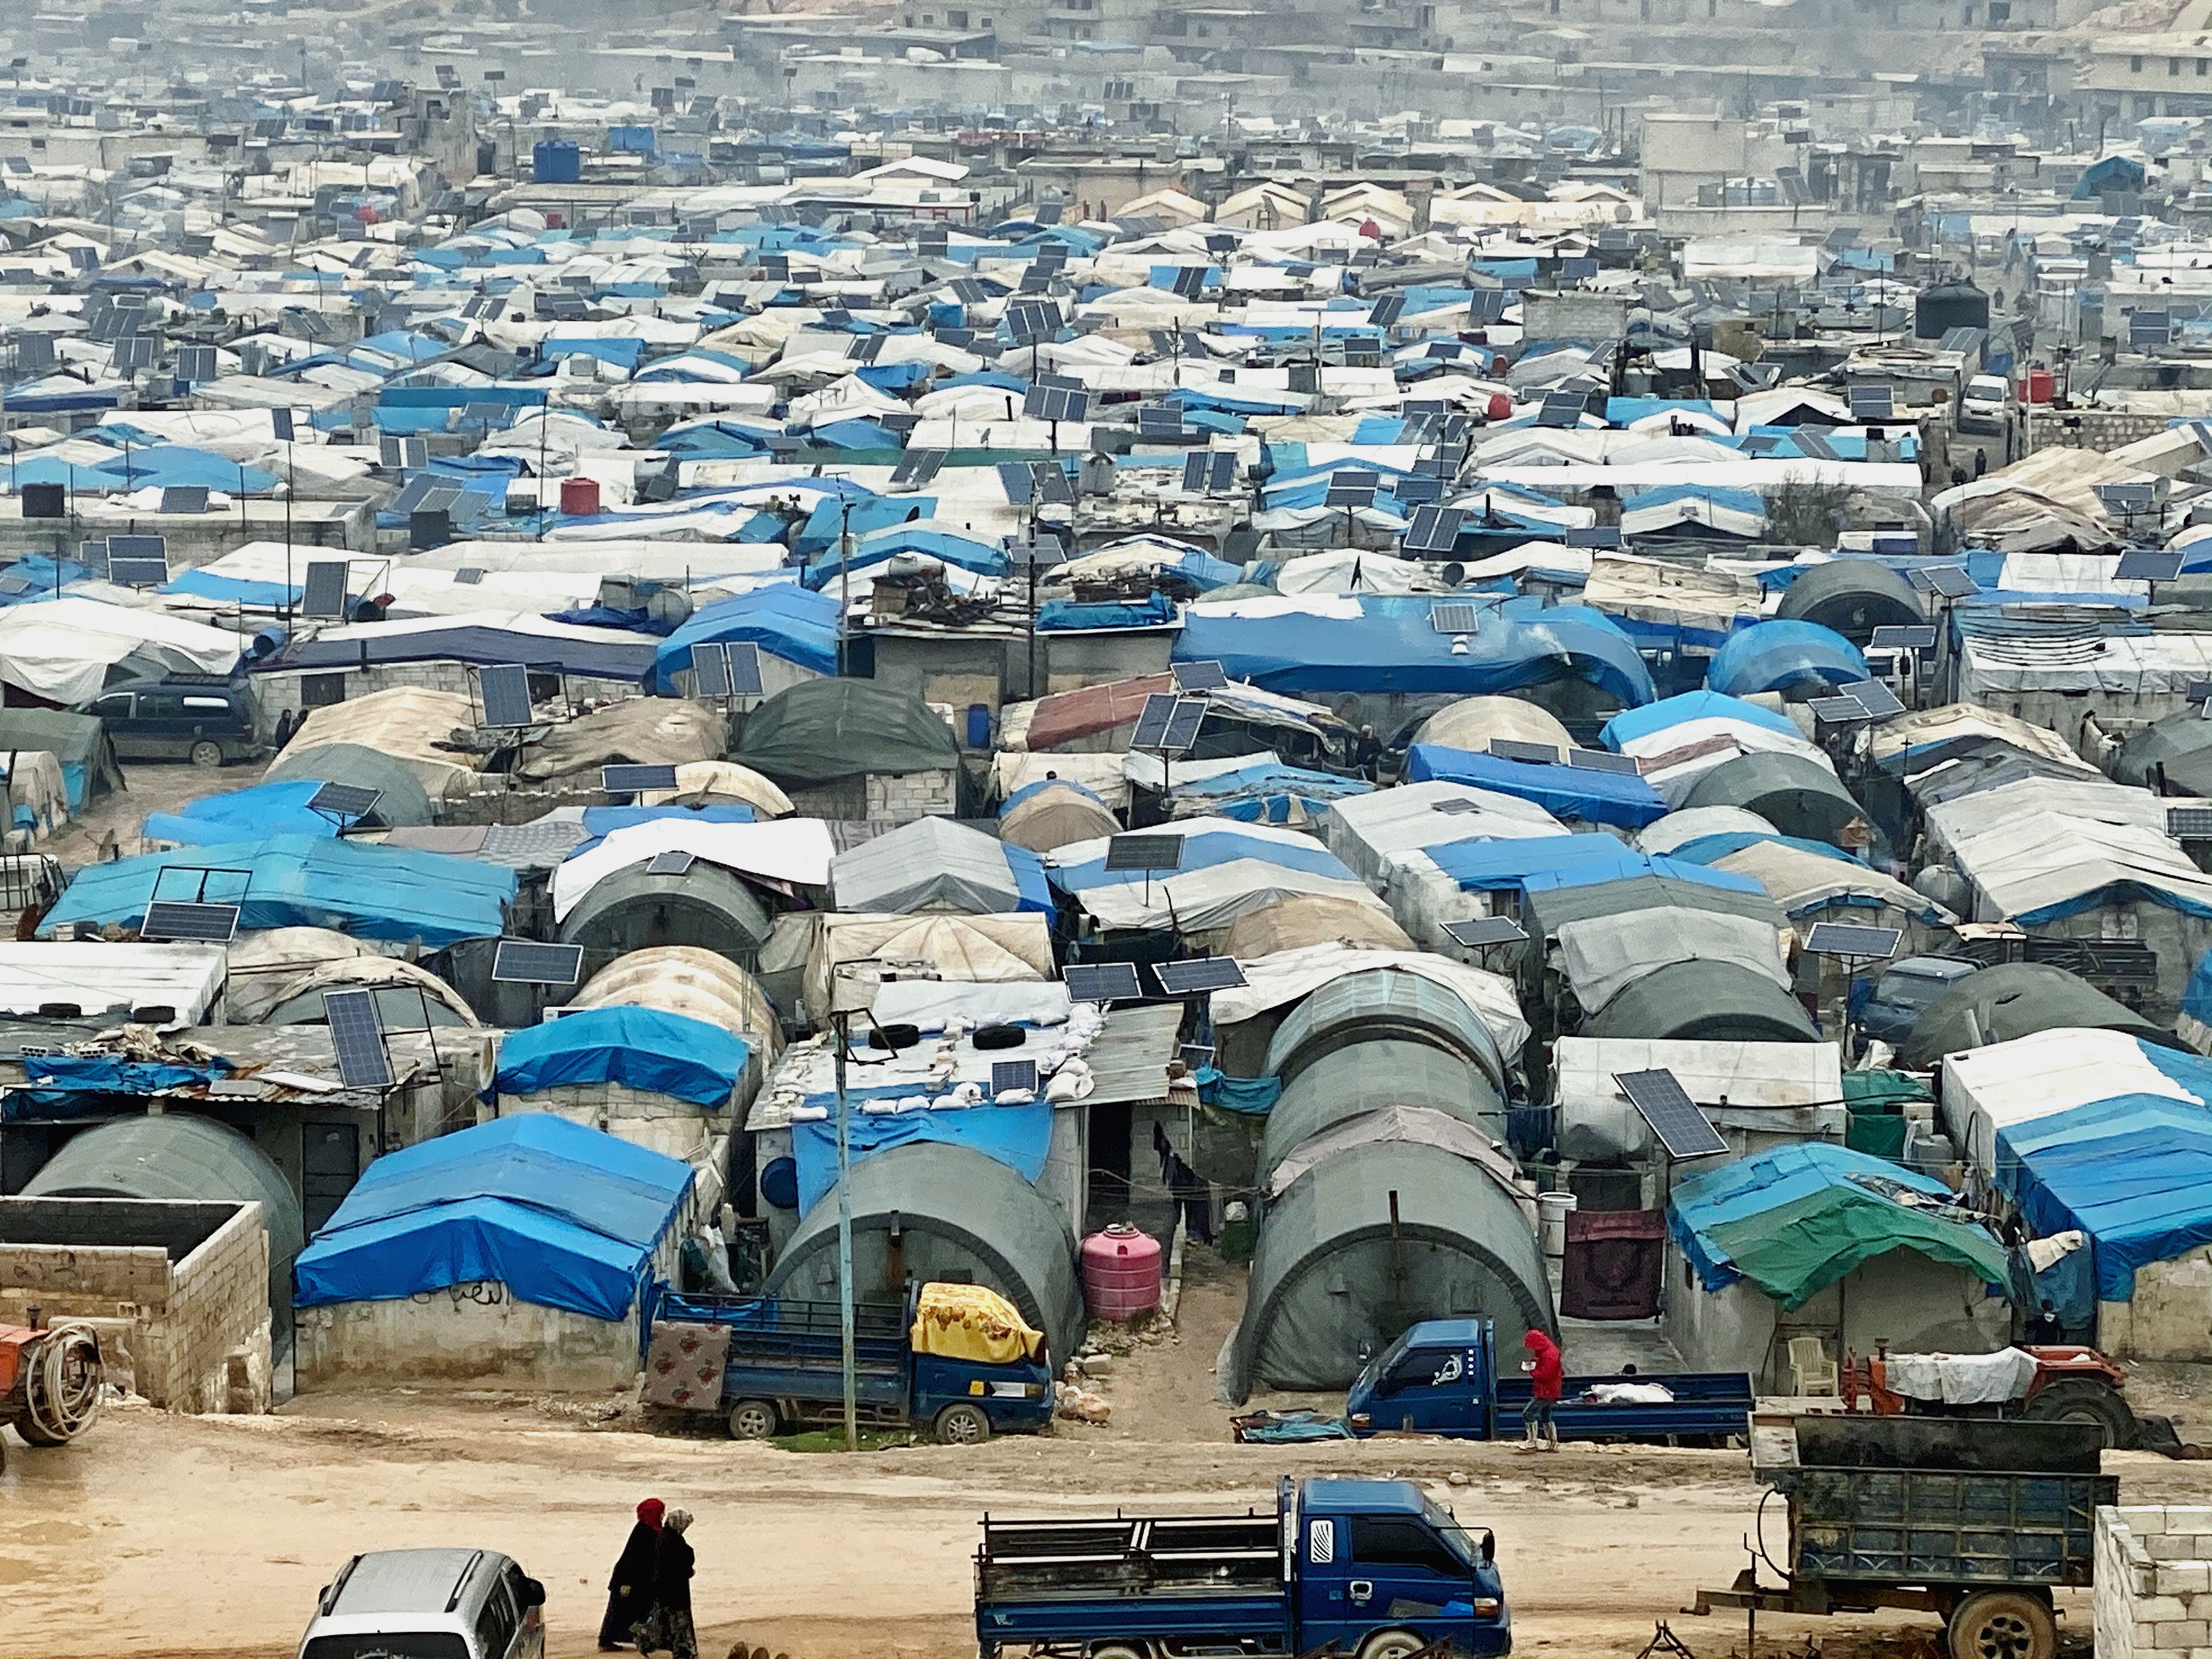 The Refugee Crisis within the Ummah: What is the Future?